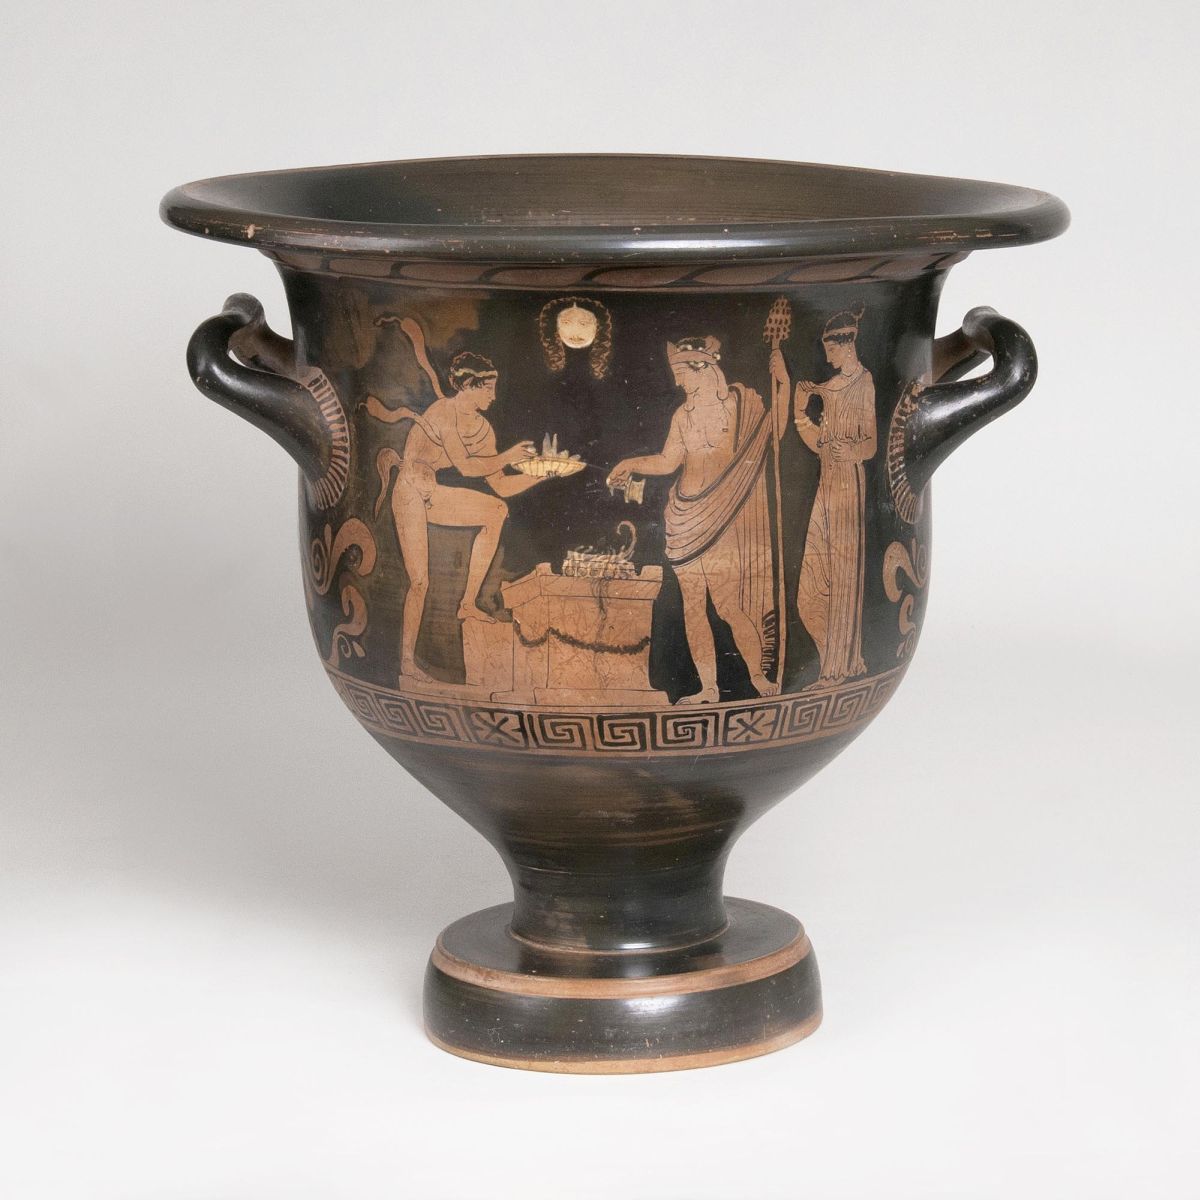 A large Apulian Red-Figured Bell Krater